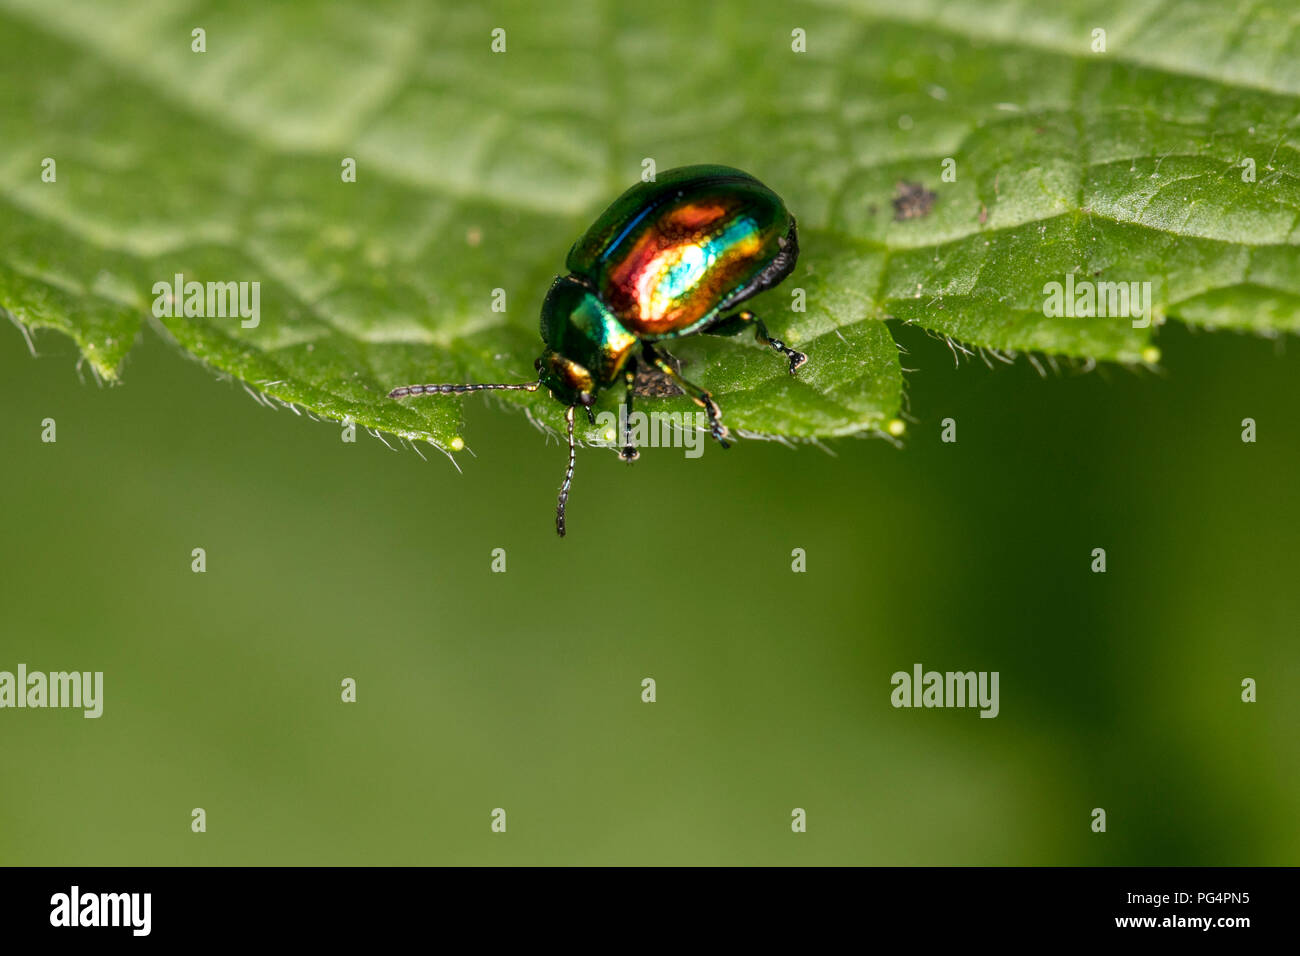 Chrysolina fastuosa, colorful beetle wanders on a green leaf, close up Stock Photo